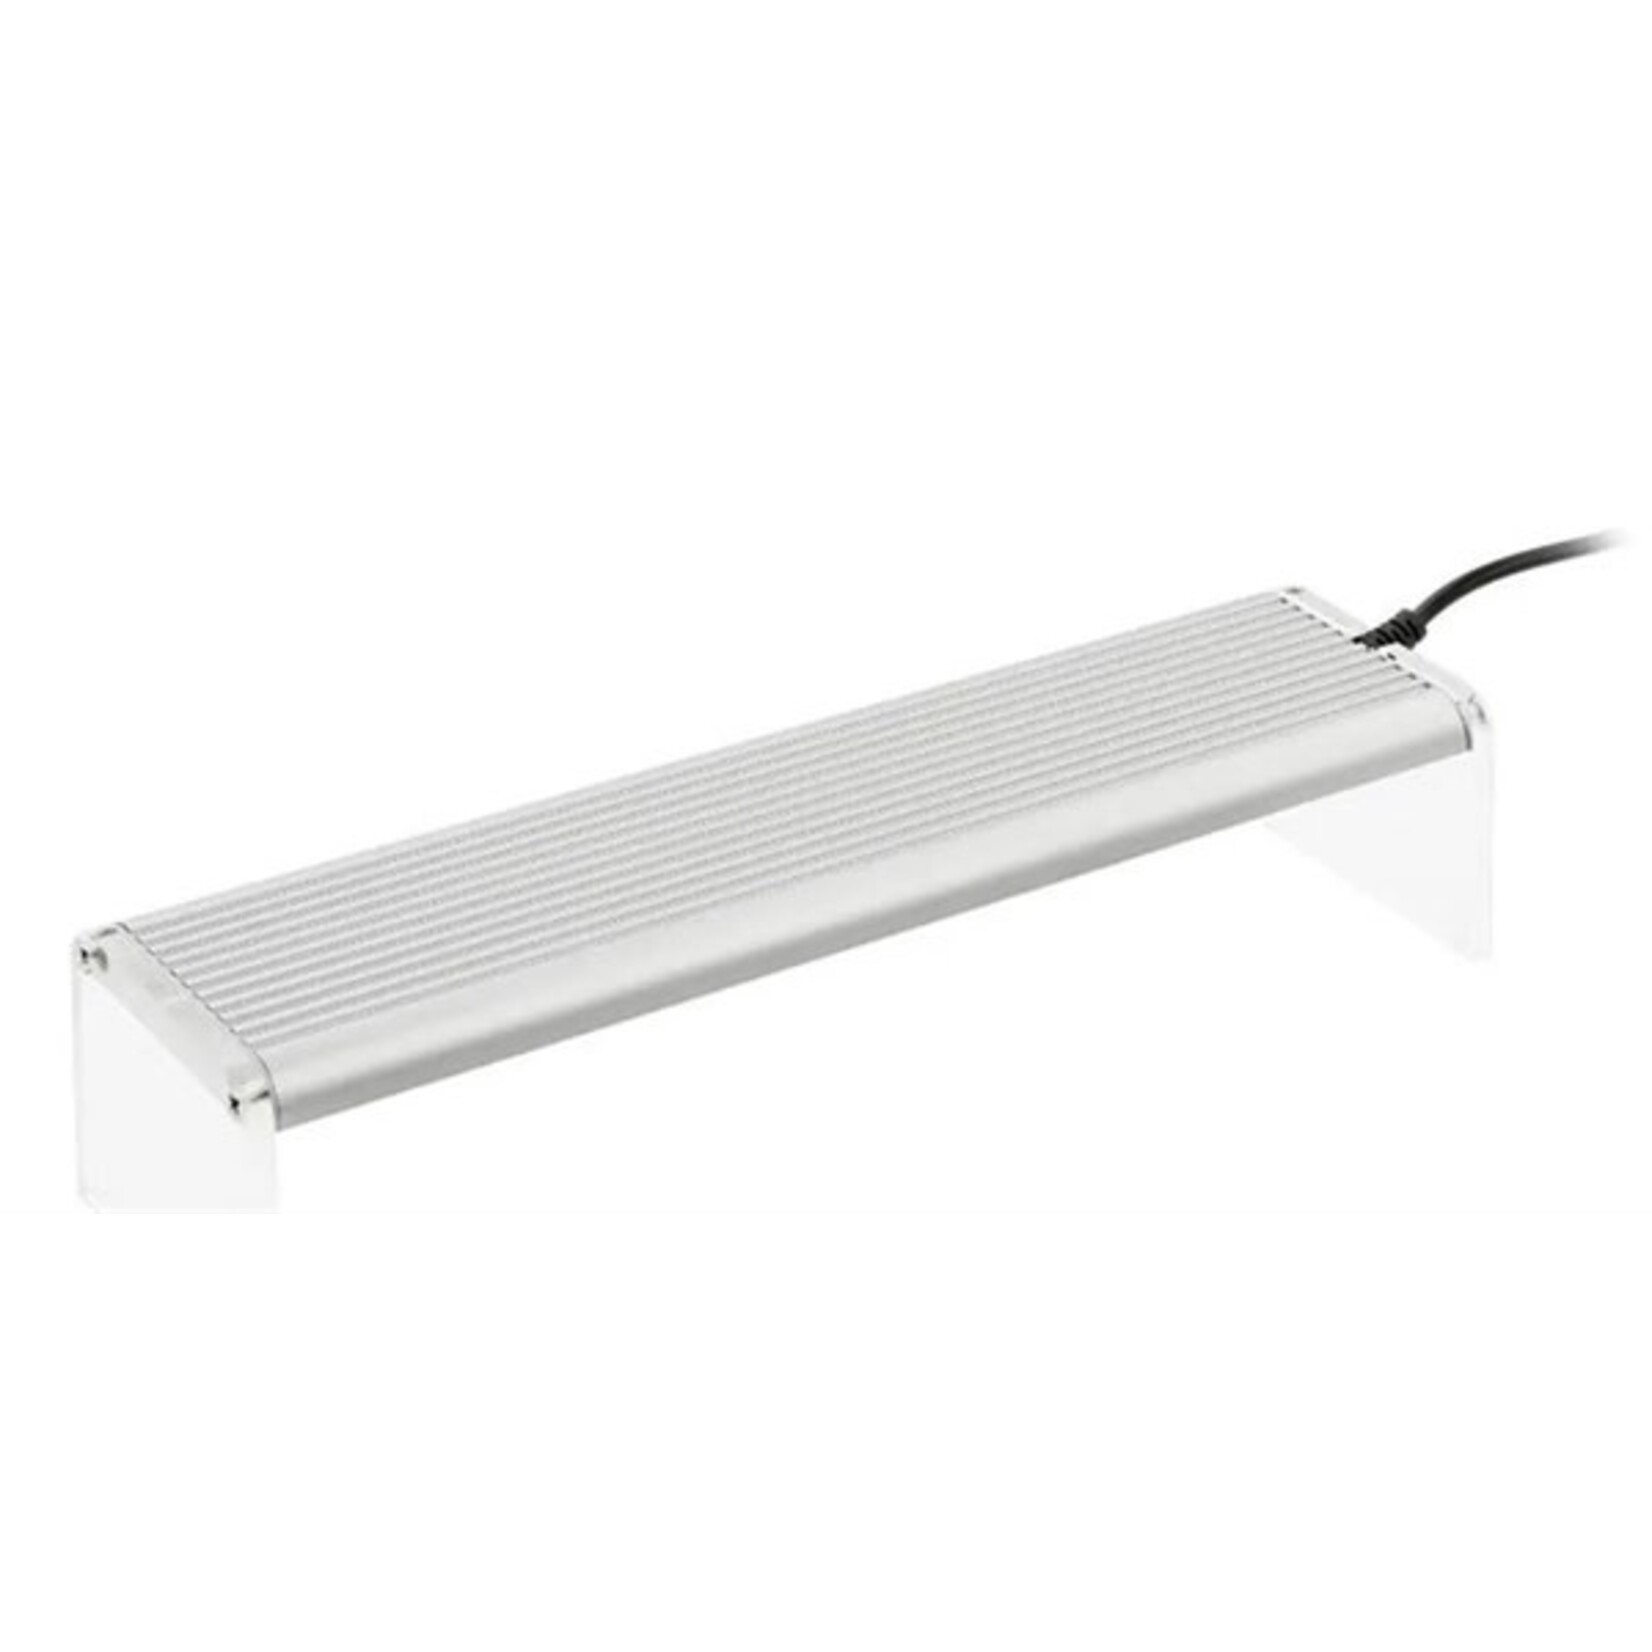 Chihiros A LED A251 25 cm 15w - incl. Duitse trafo